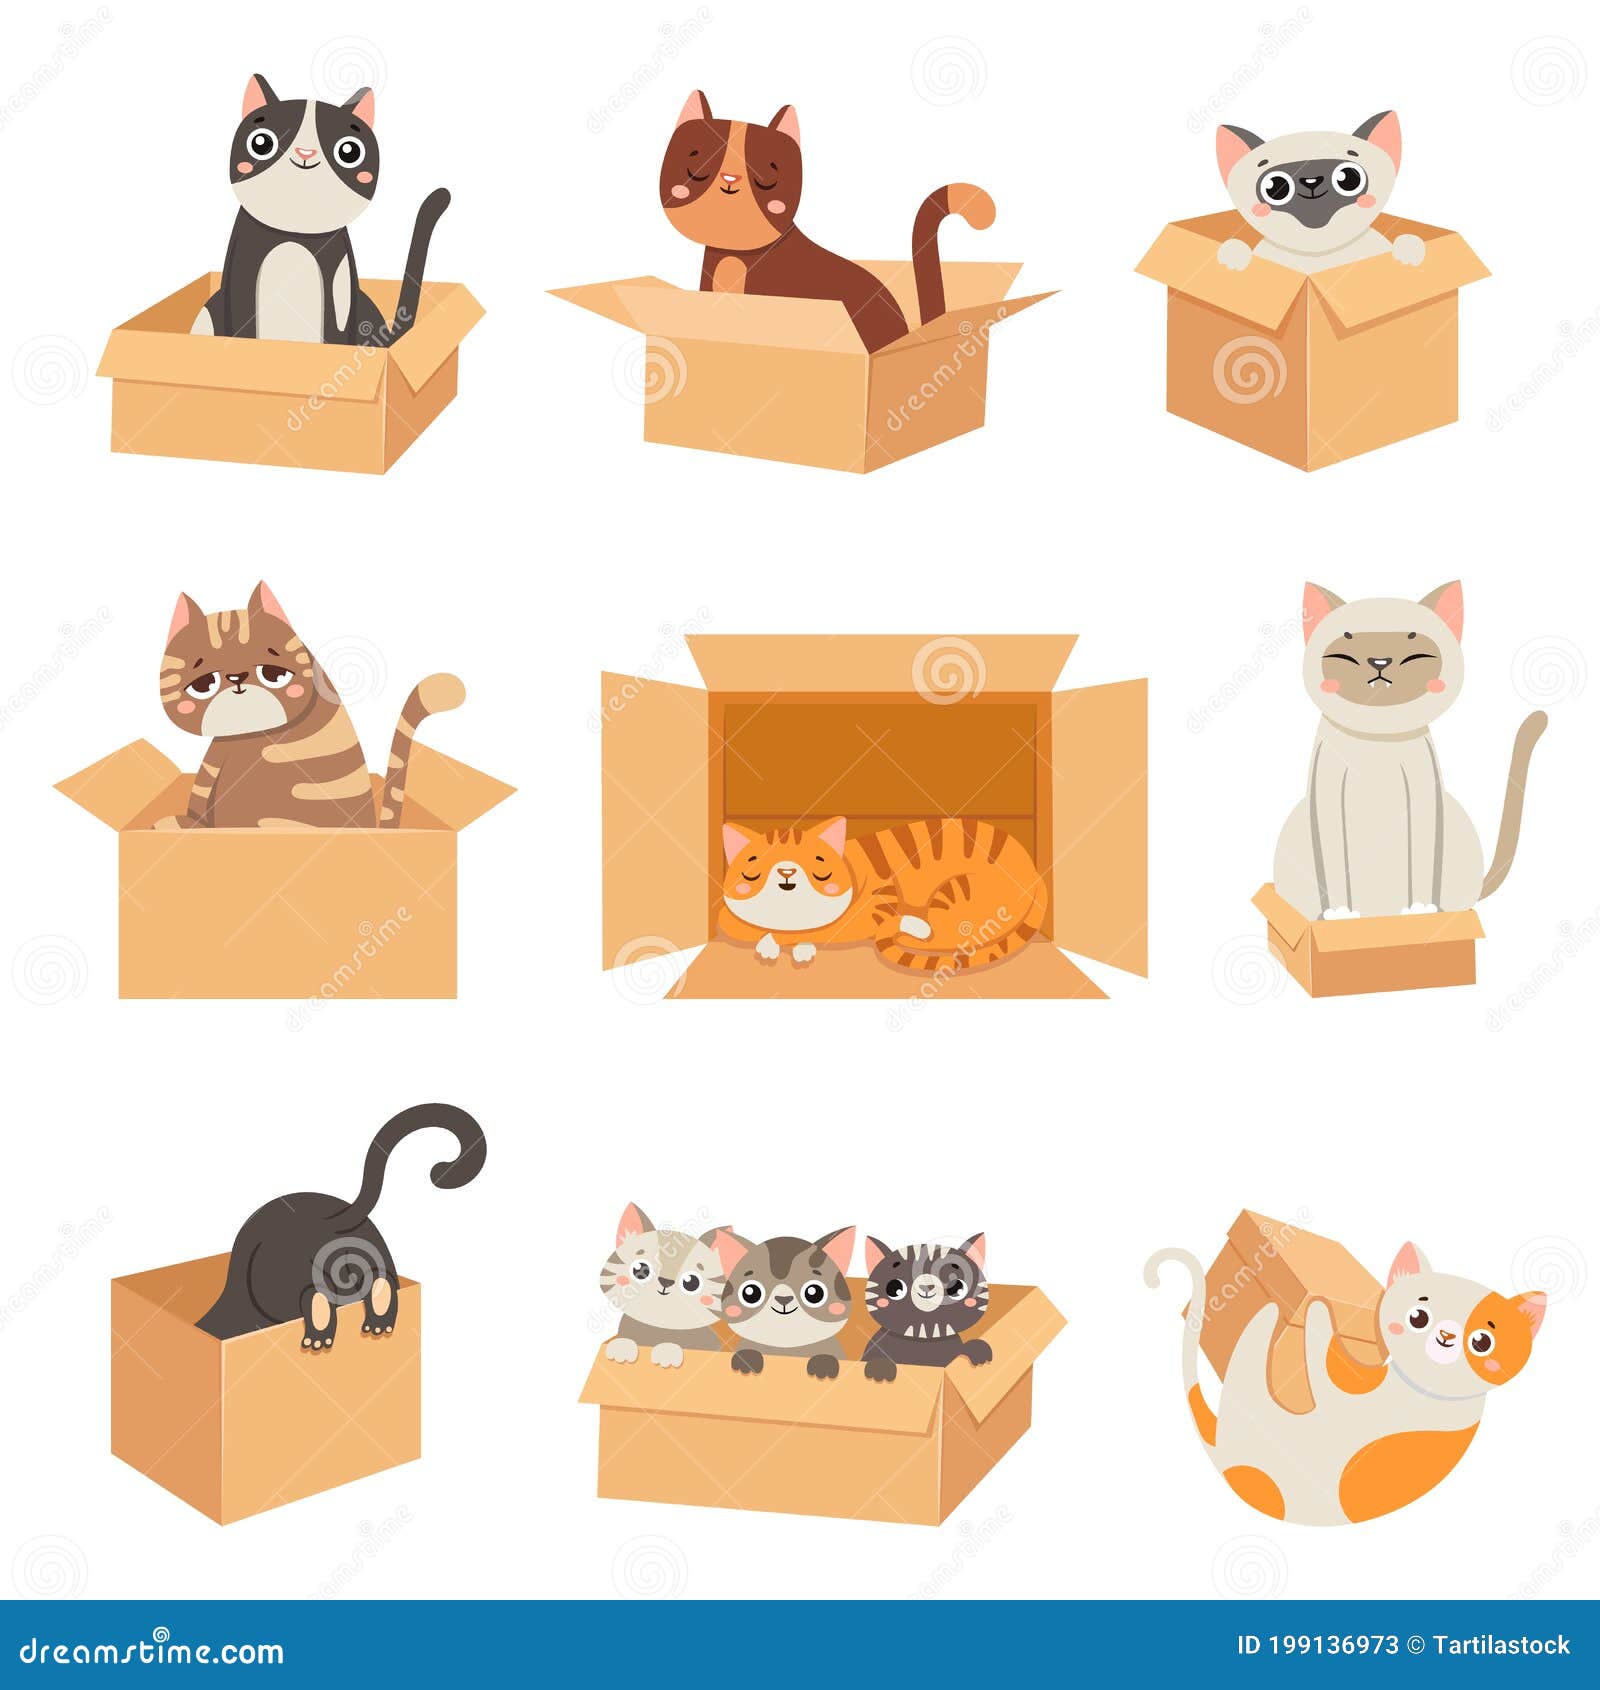 Cats In Boxes Cute Stickers With Cat Sitting Sleeping And Playing In Cardboard Box Funny Hiding Kittens Adopt Stock Vector Illustration Of Graphic Celebration 199136973